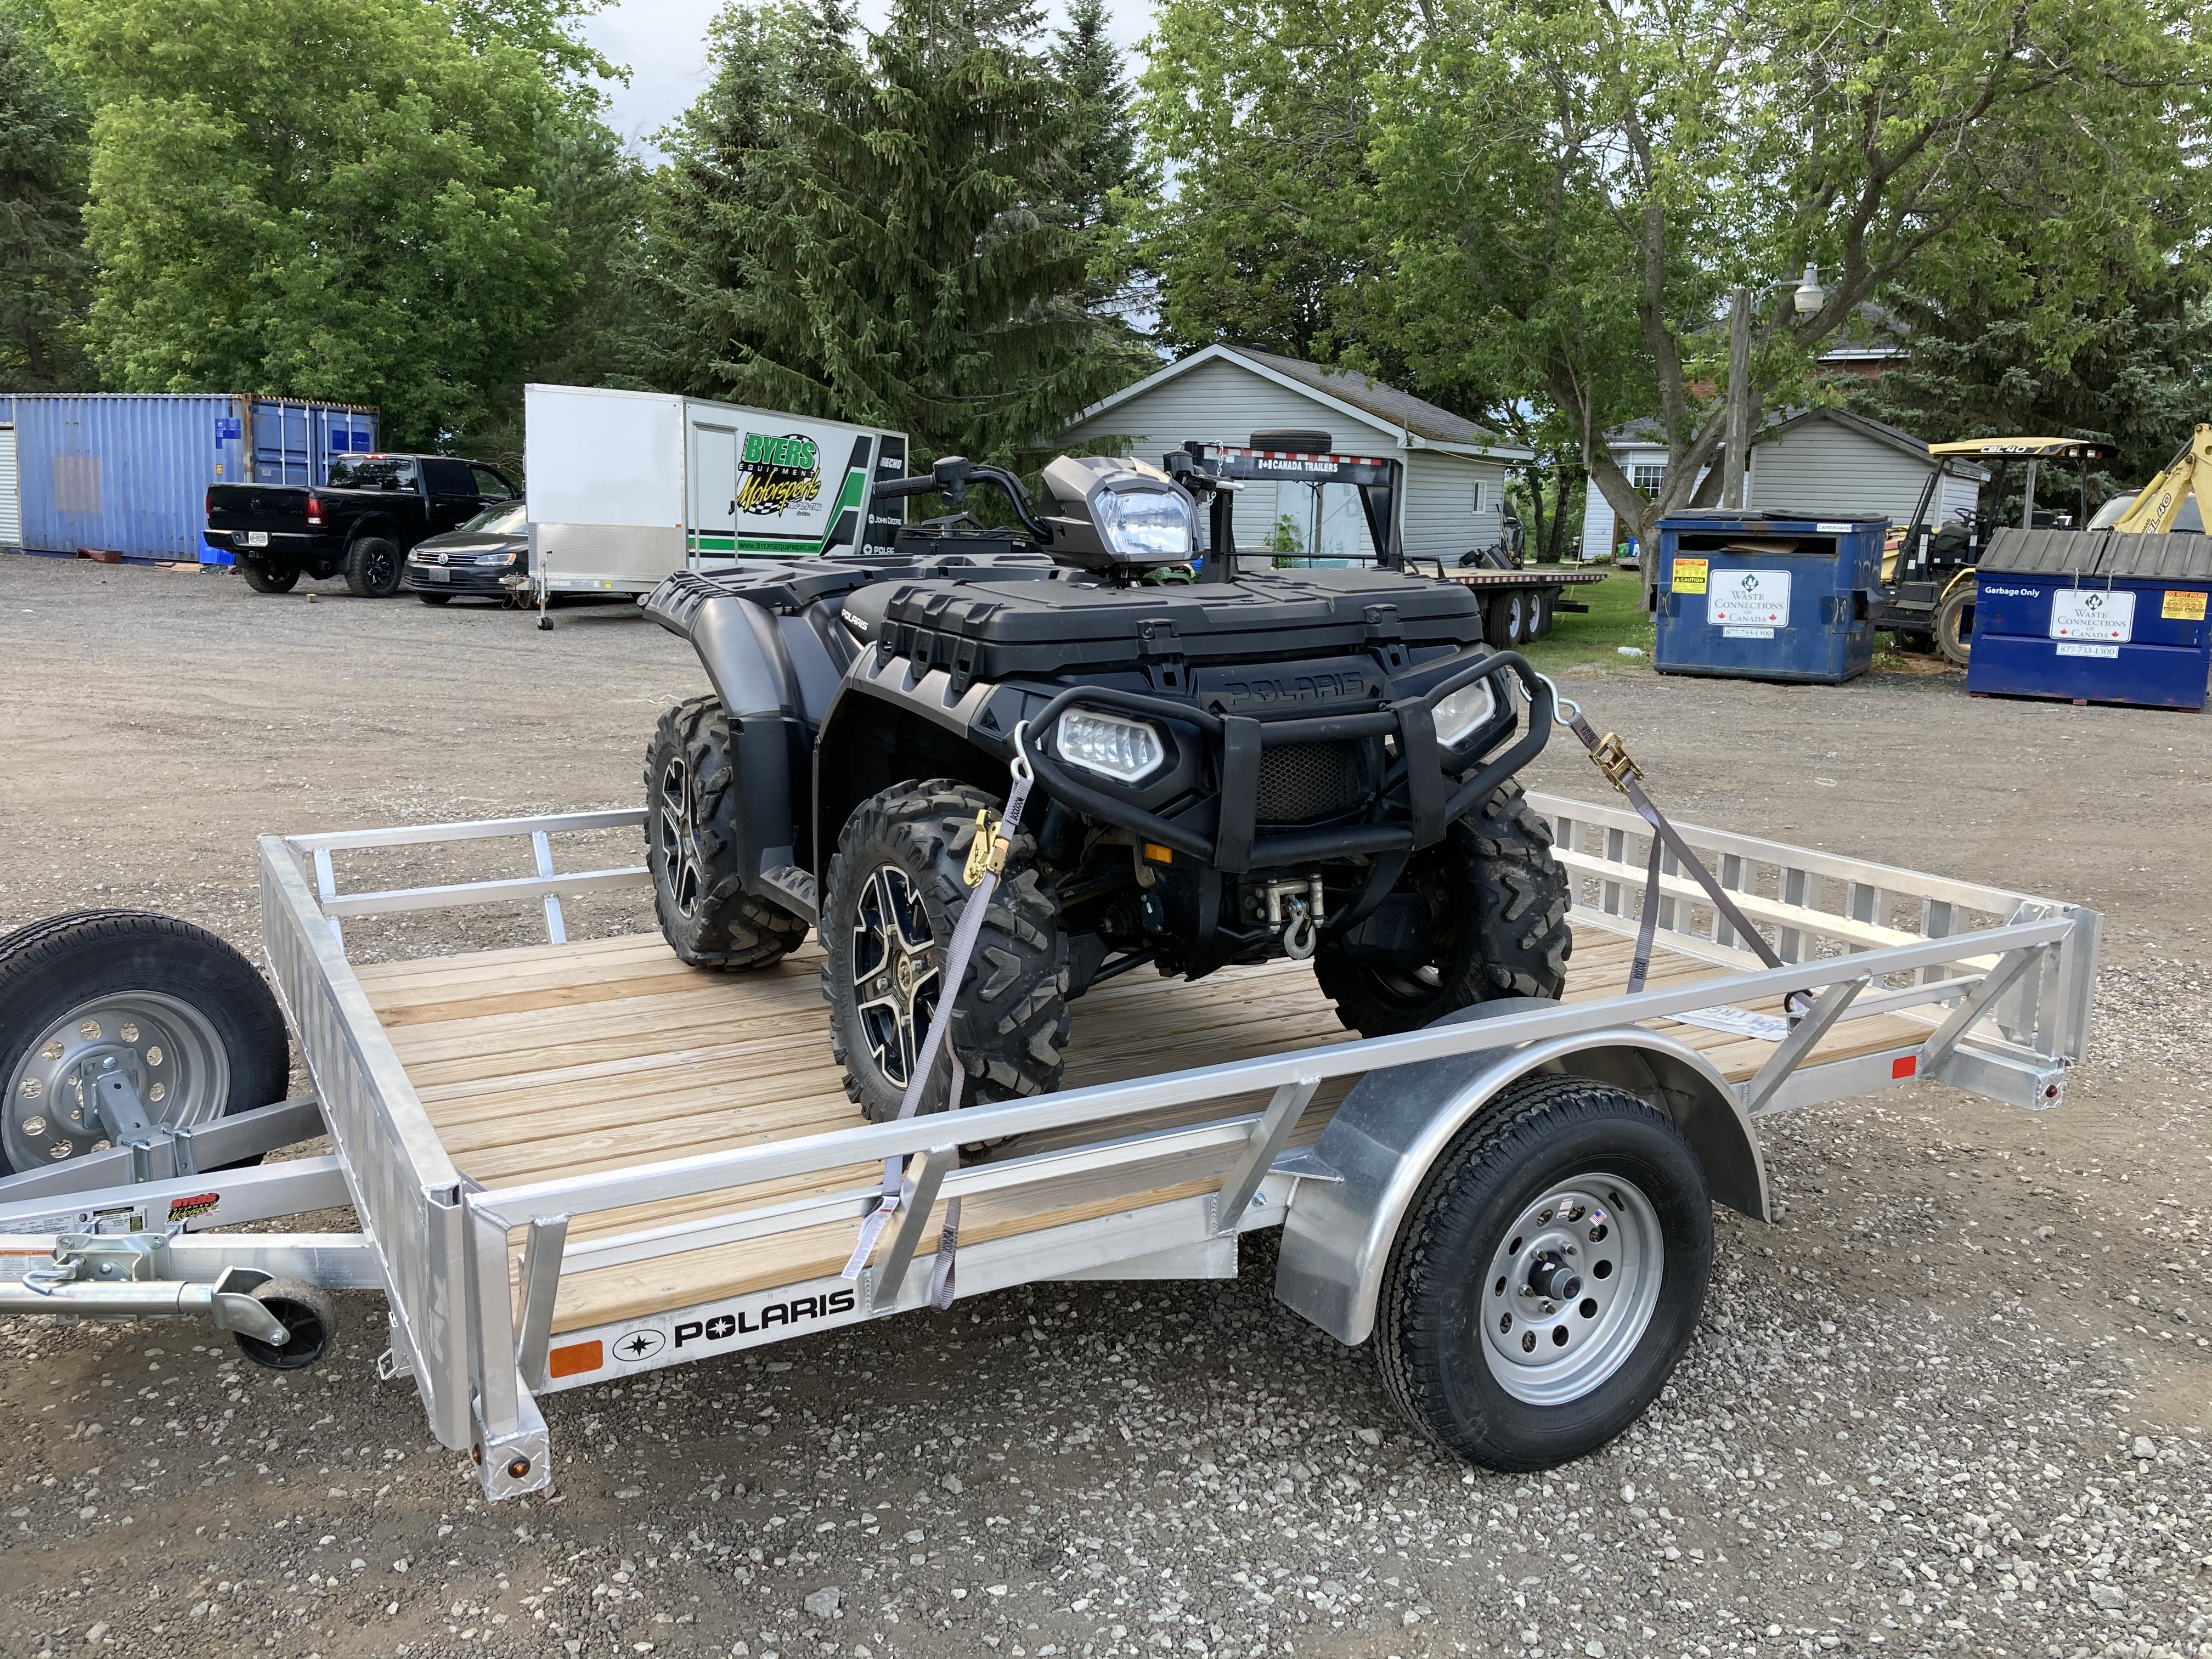 The new-to-me ATV loaded on the aluminum trailer. It’s grey.